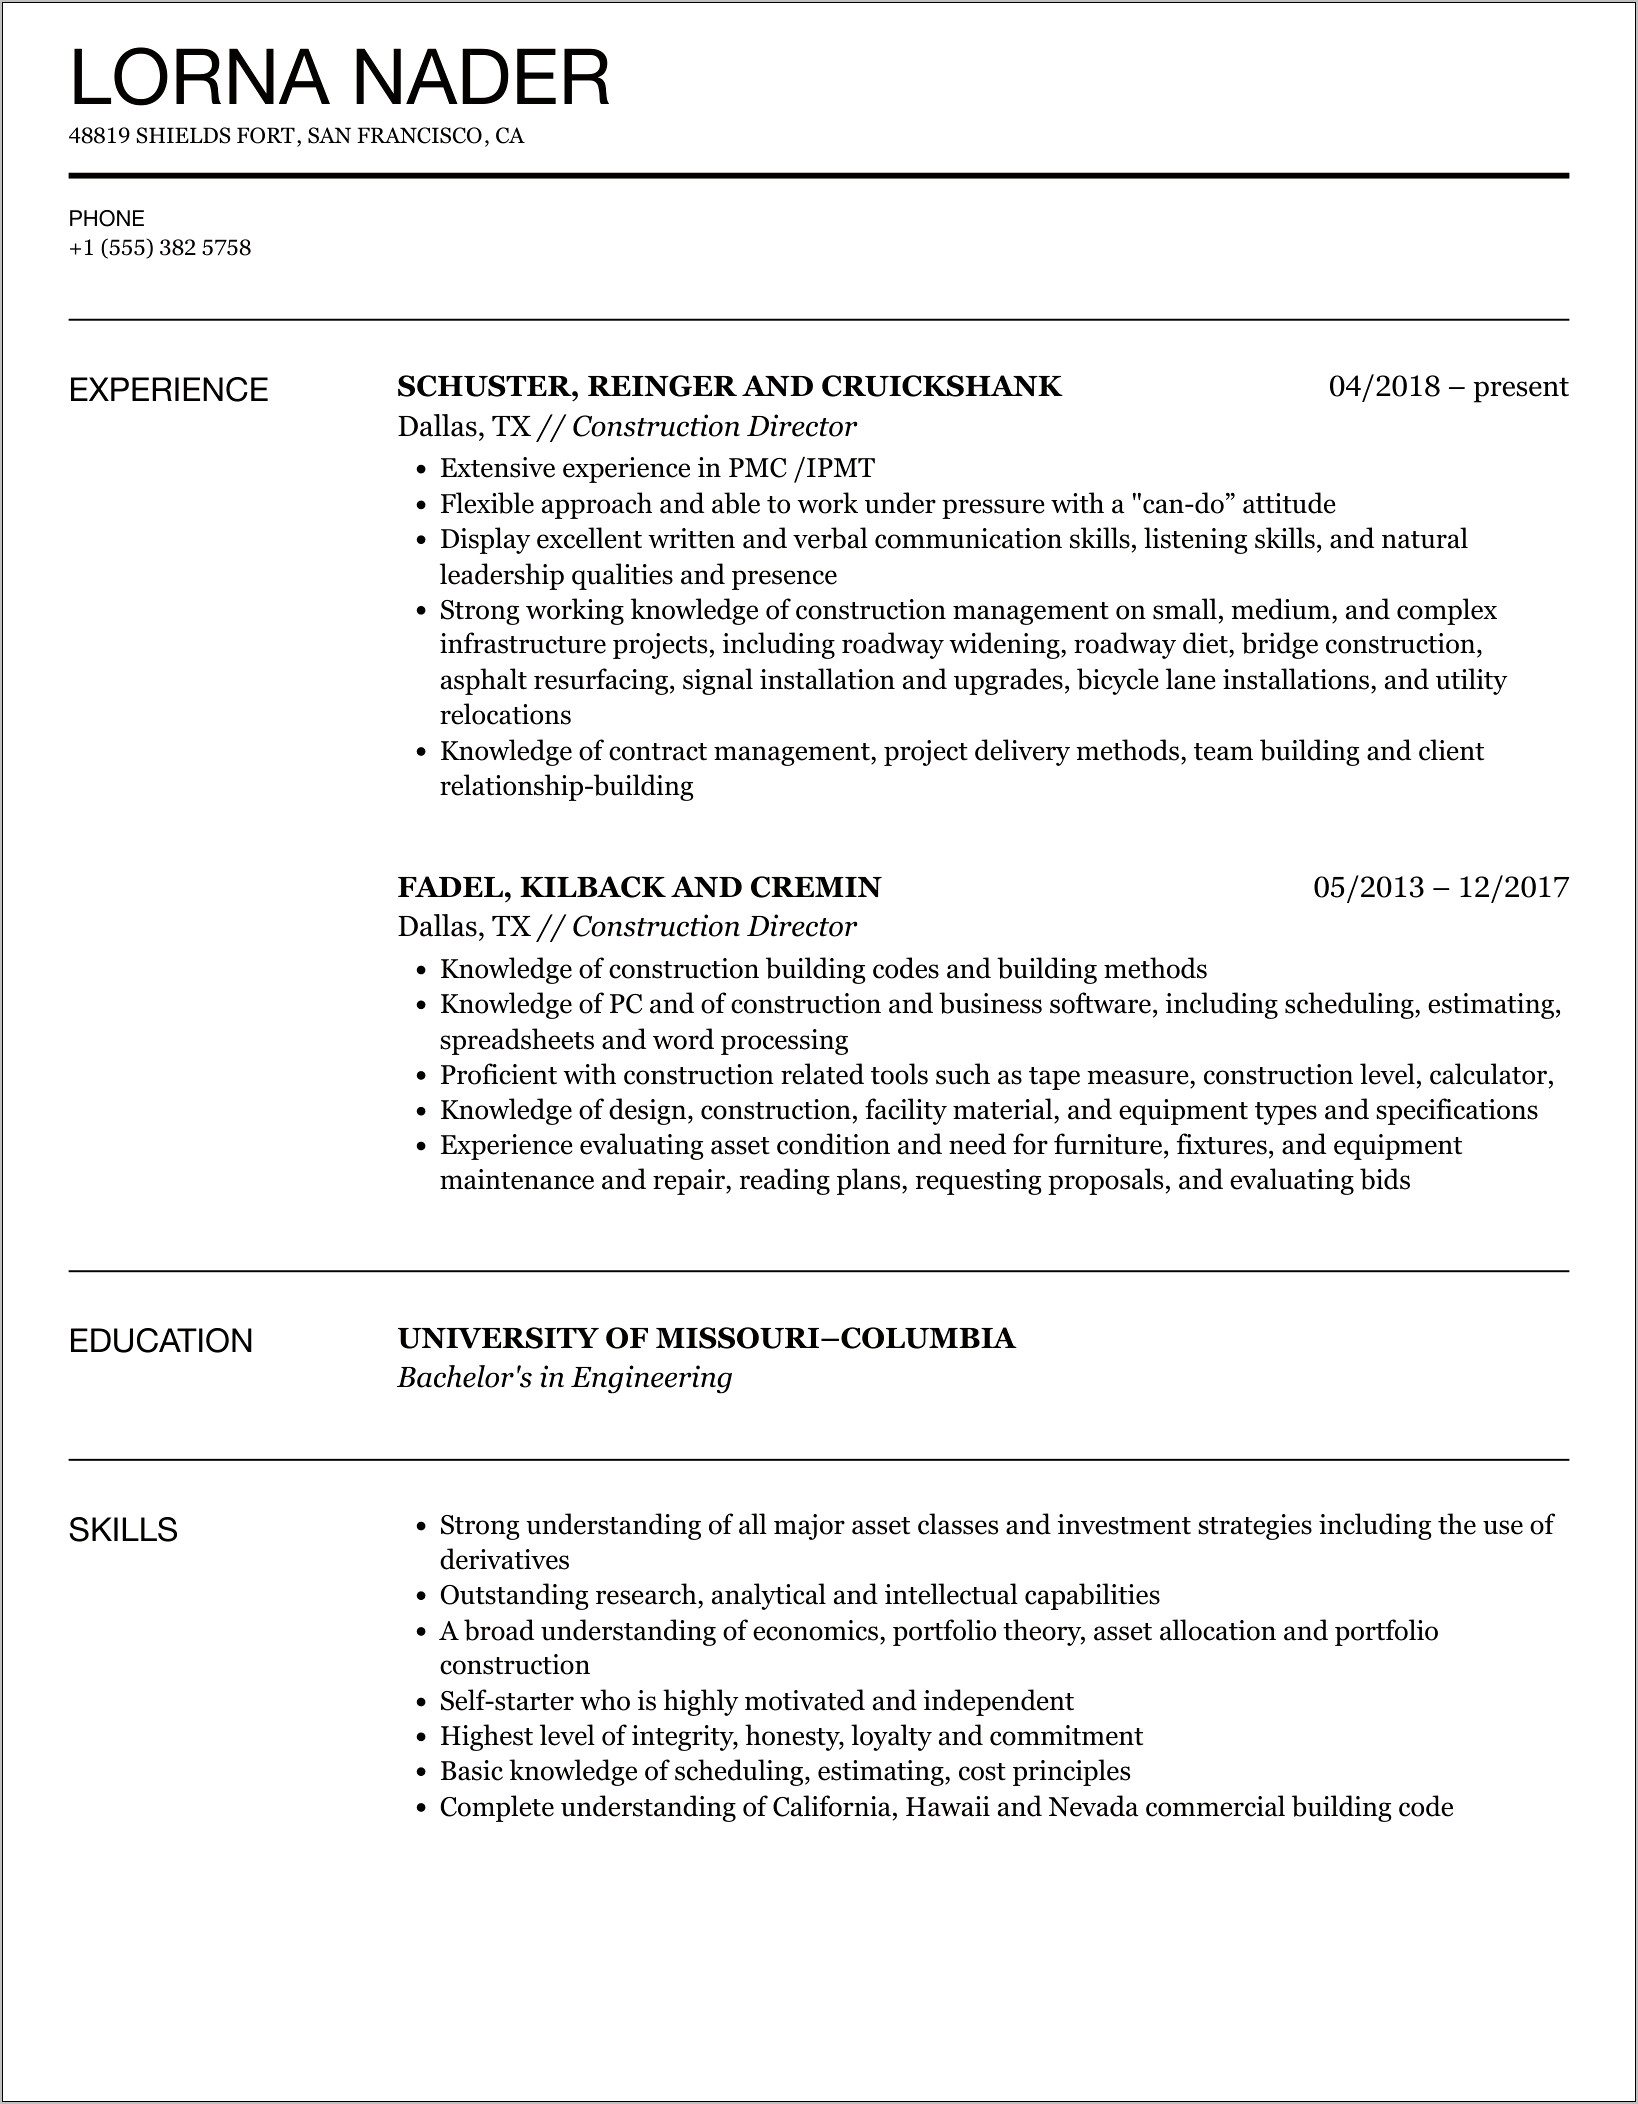 Resume Examples For Construction Directors